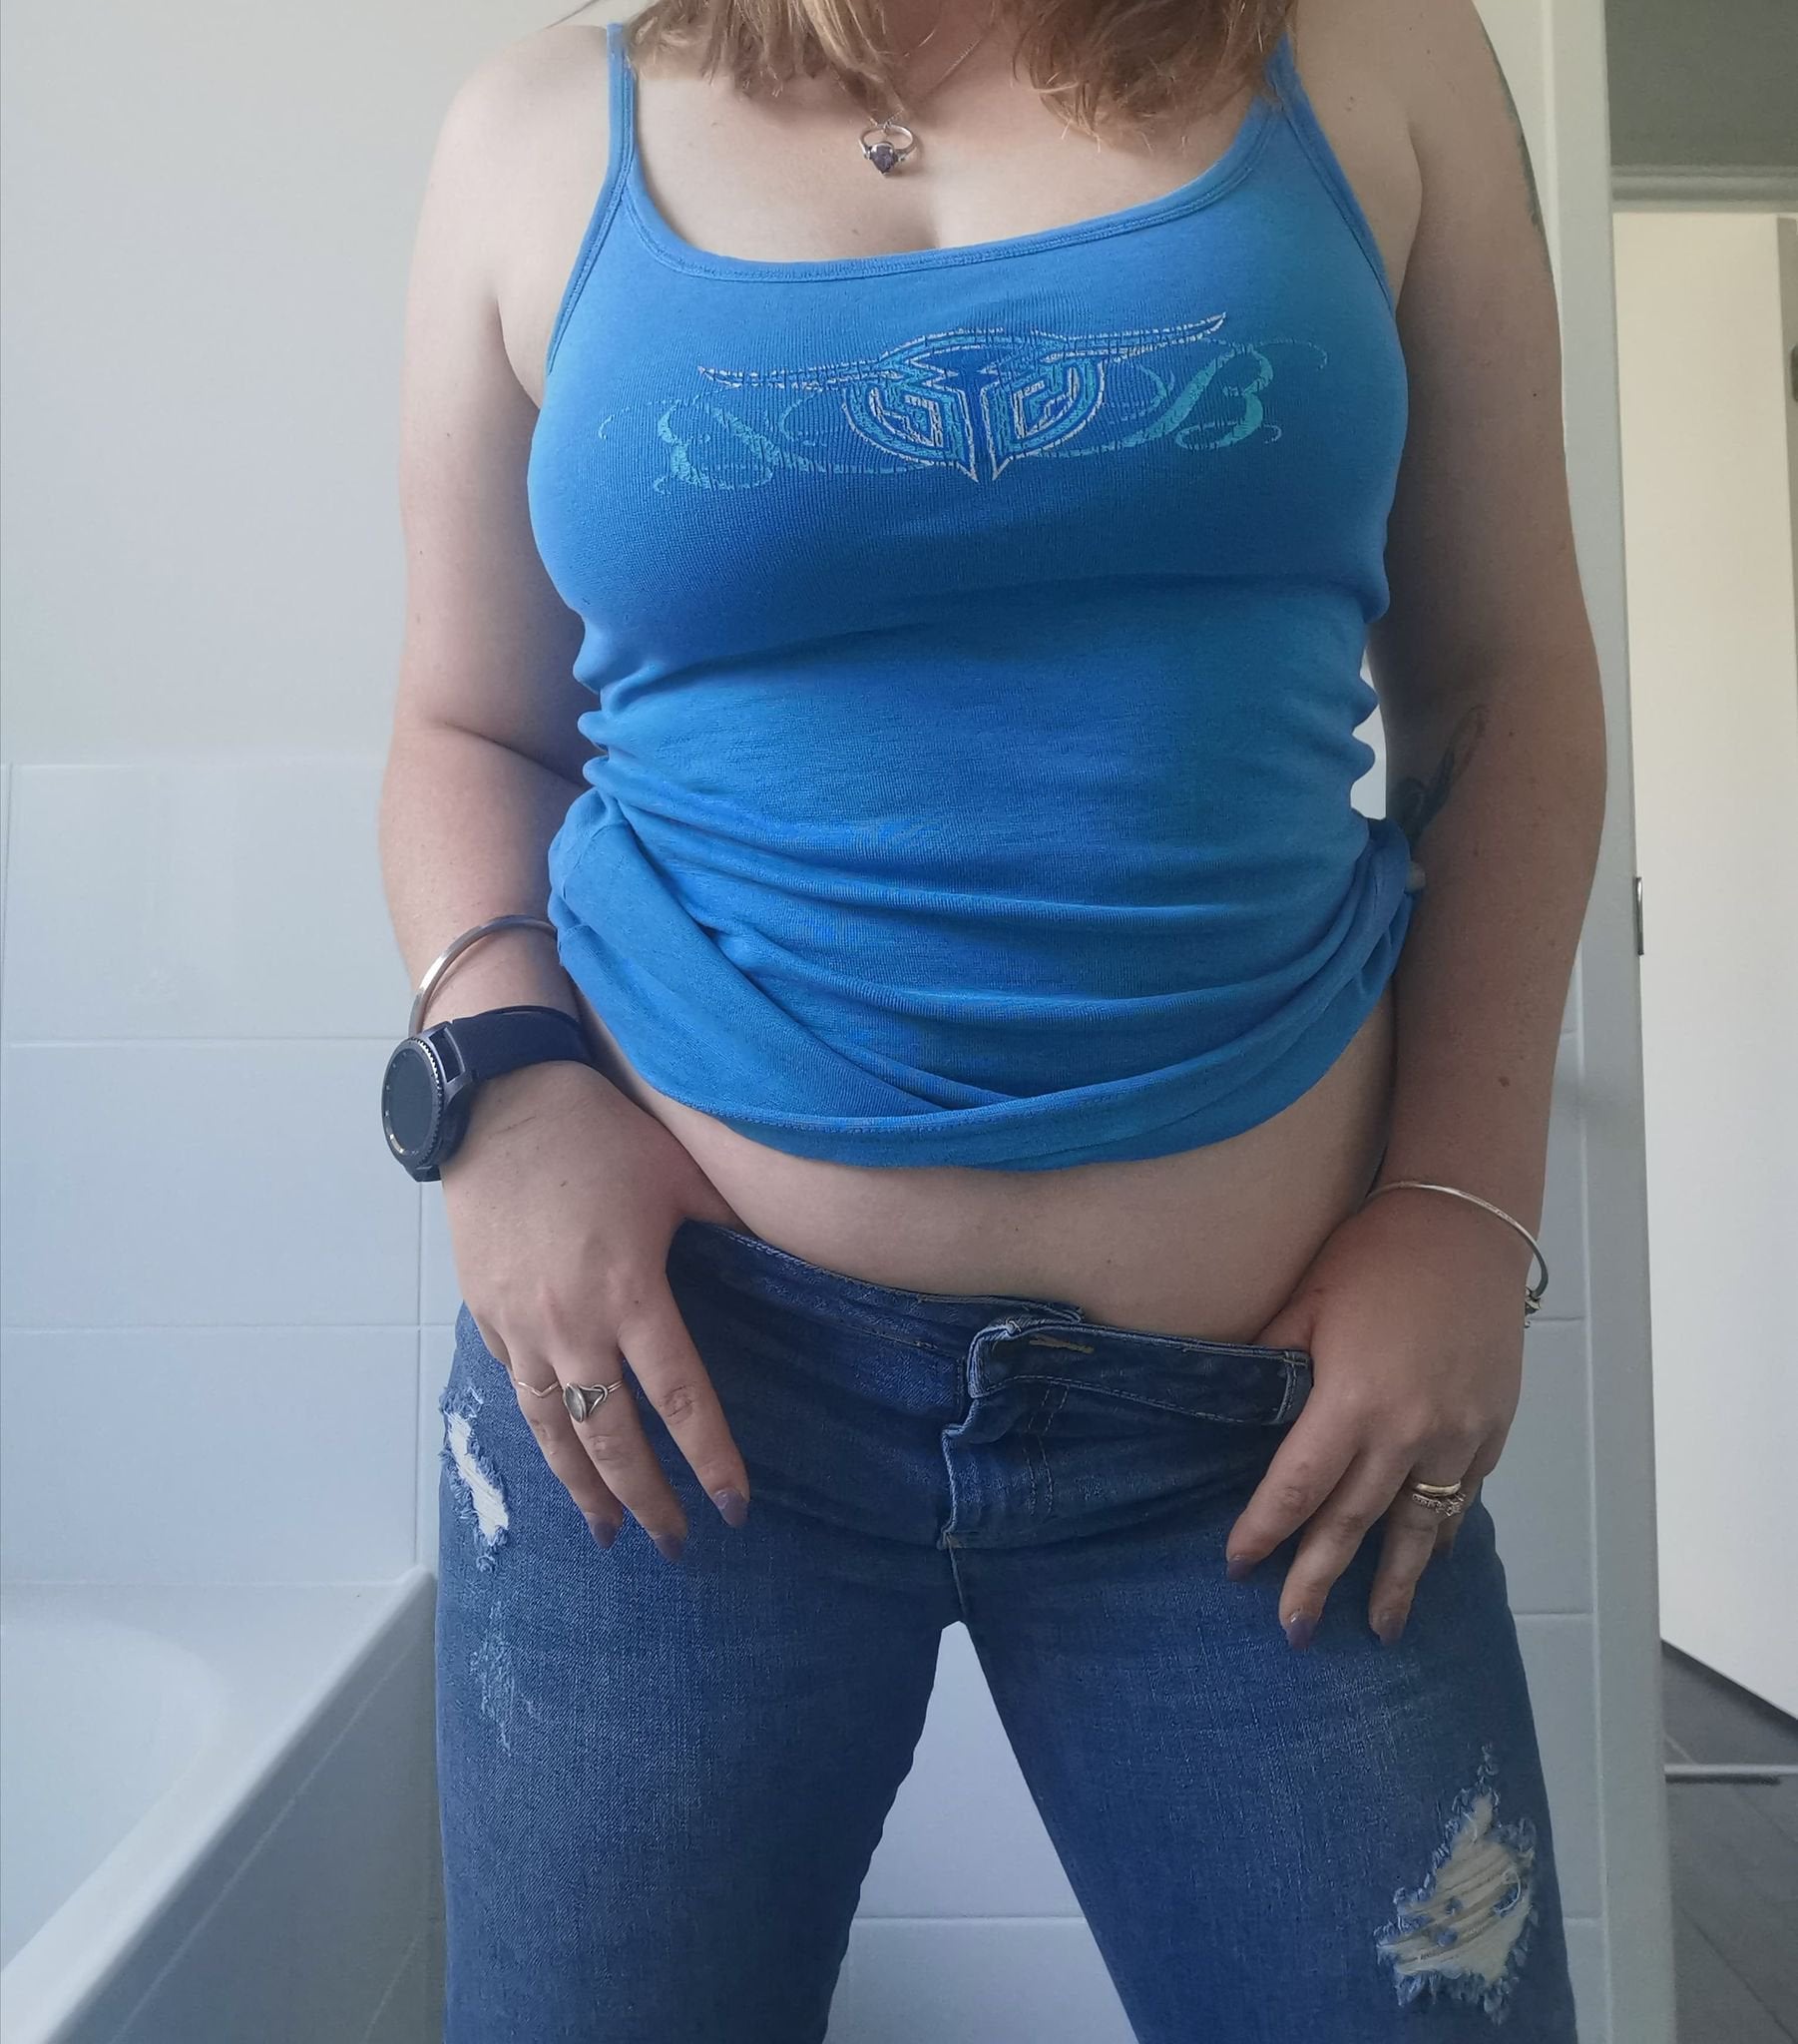 Like thick bi girls in jeans and a tank 26F